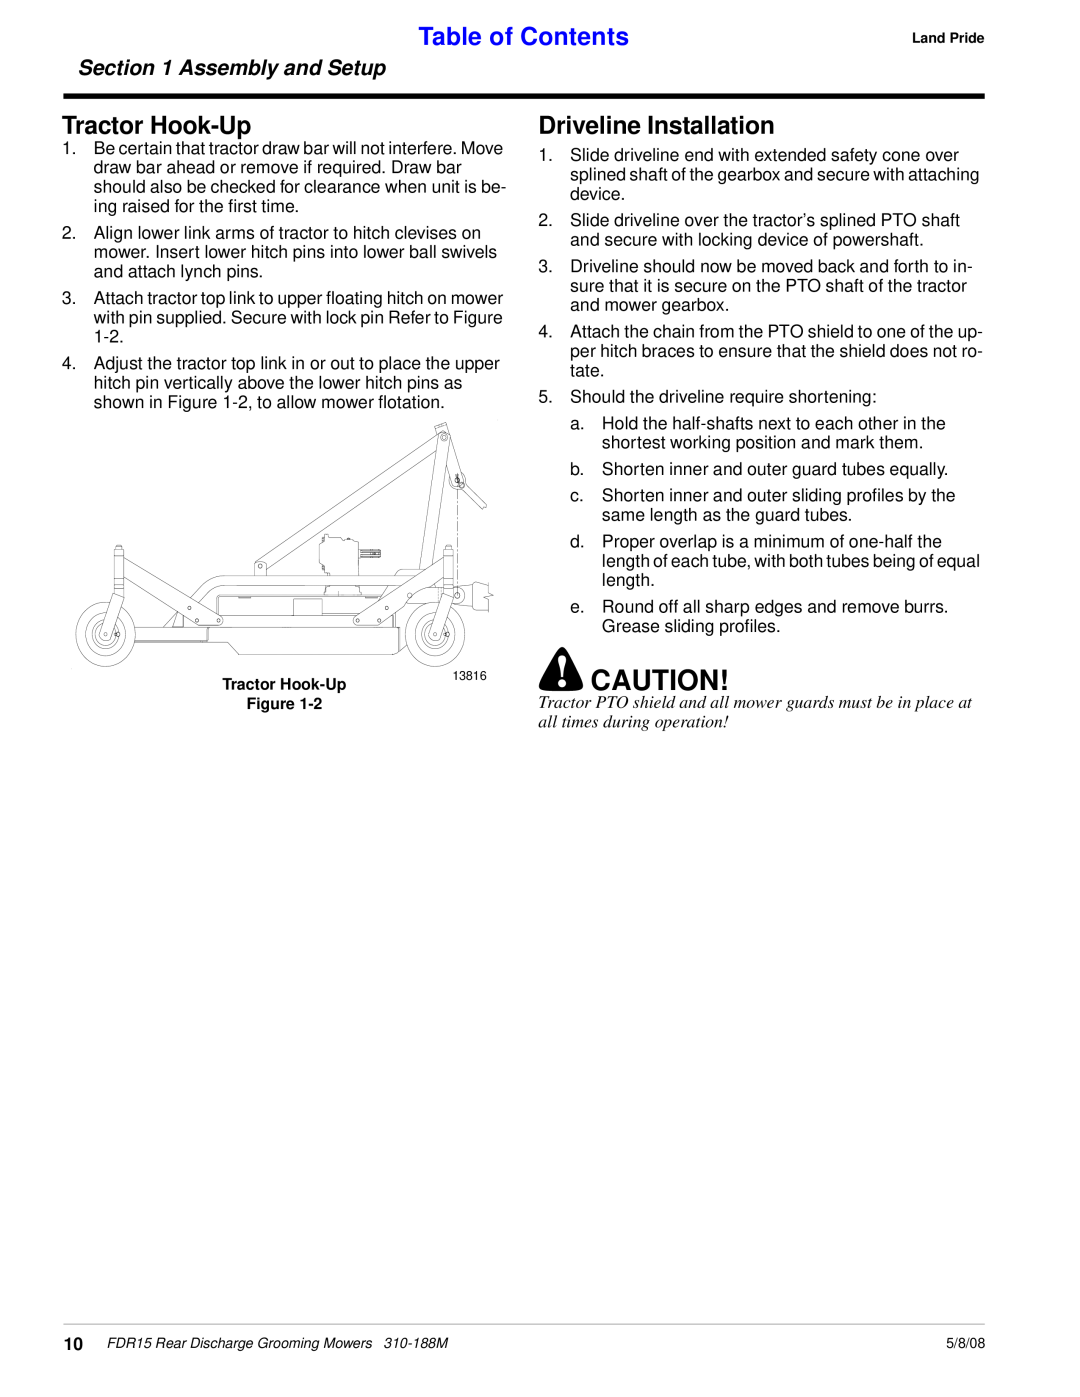 Land Pride FDR15 manual Tractor Hook-Up, Driveline Installation, Table of Contents, Assembly and Setup 